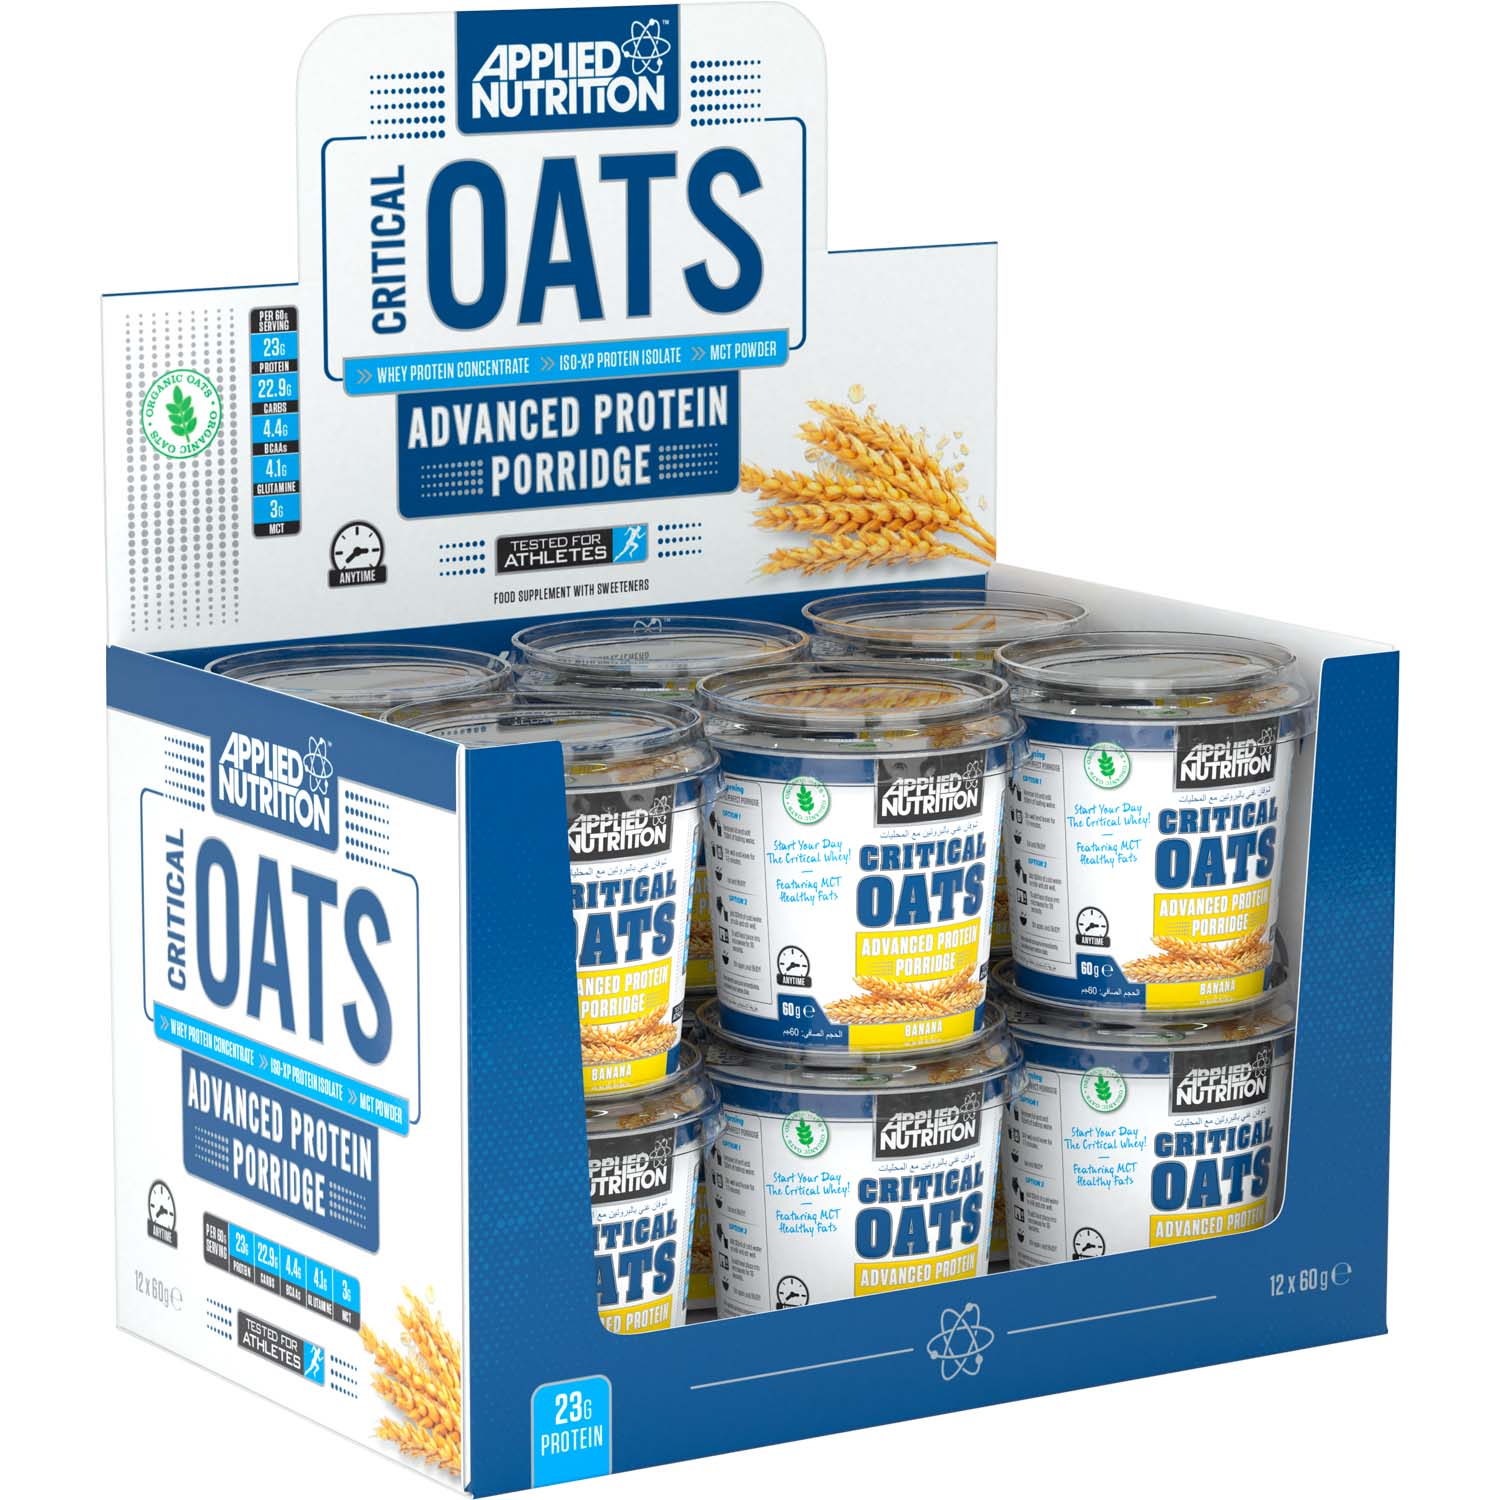 Applied Nutrition Critical Oats, Banana, Box of 12 Pieces